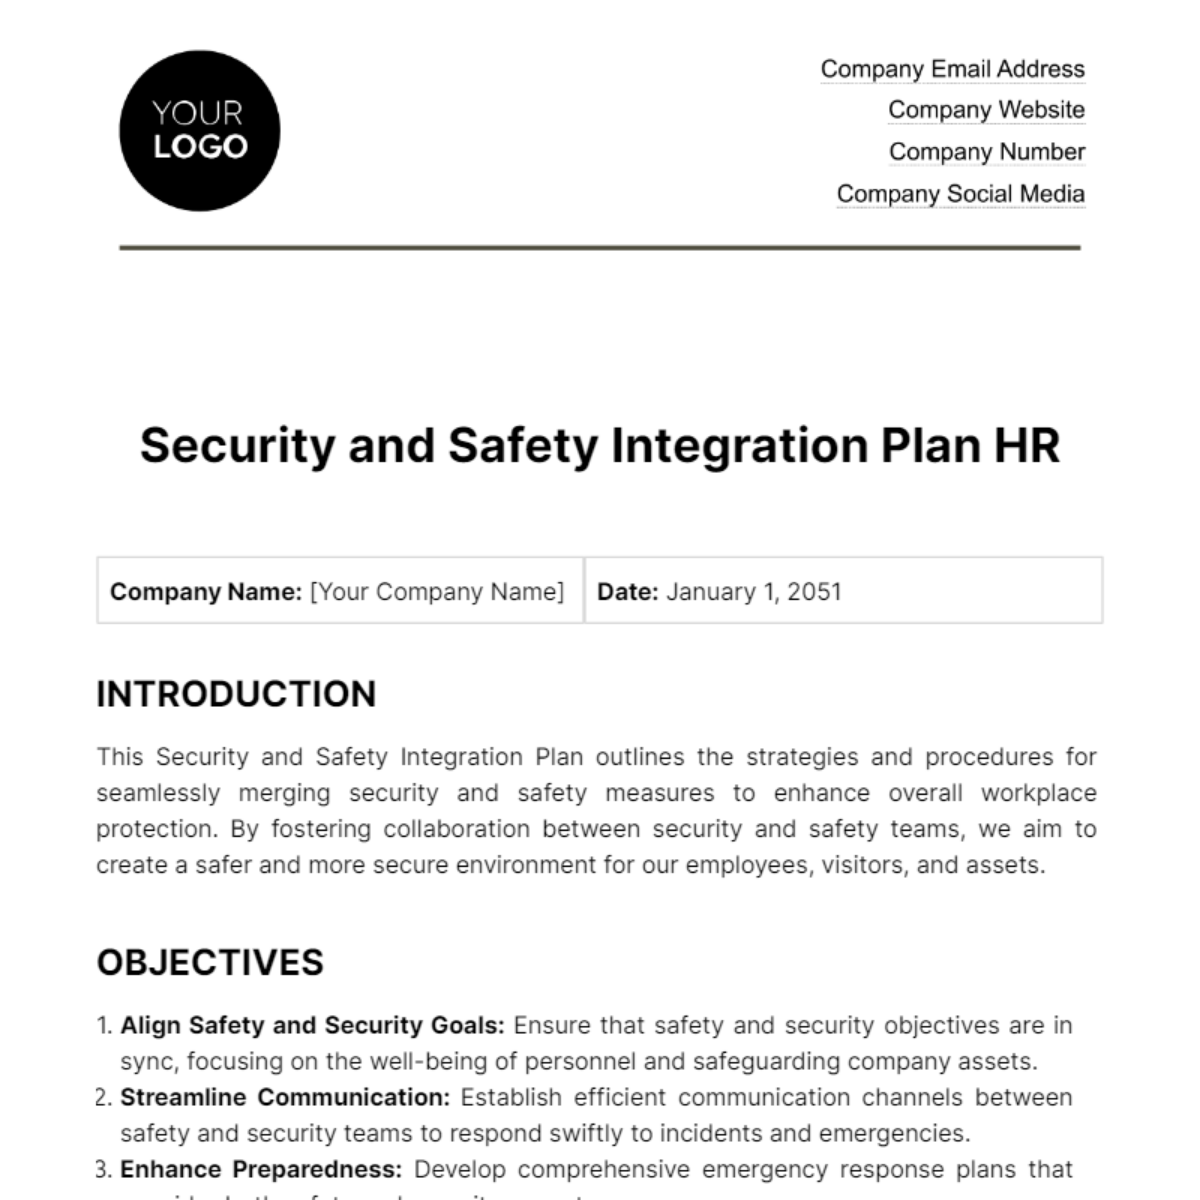 Security and Safety Integration Plan HR Template